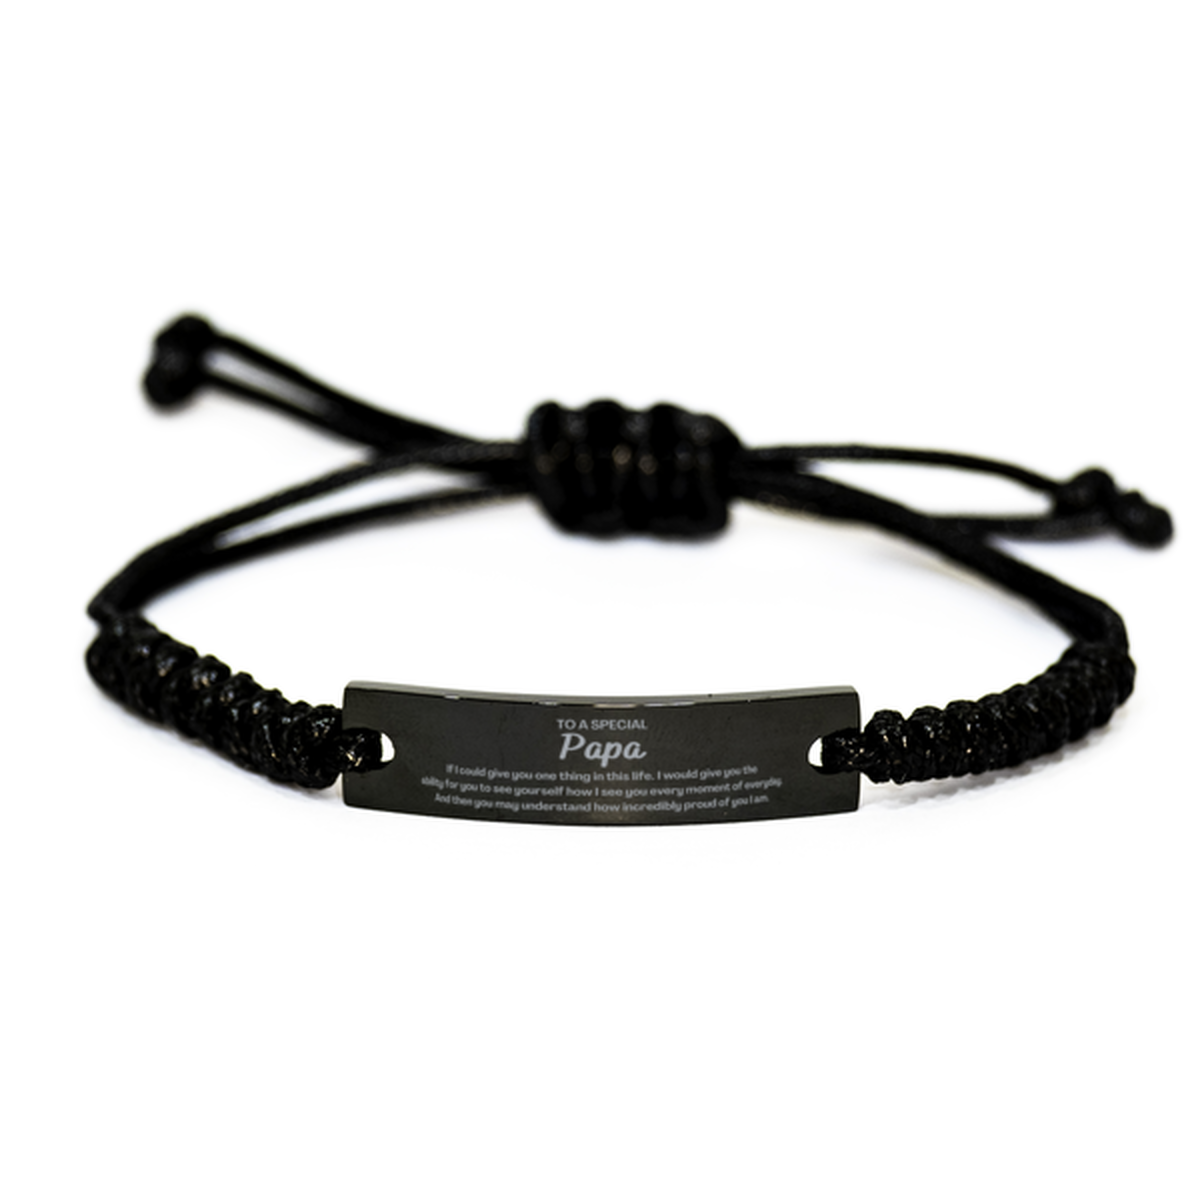 To My Papa Black Rope Bracelet, Gifts For Papa Engraved, Inspirational Gifts for Christmas Birthday, Epic Gifts for Papa To A Special Papa how incredibly proud of you I am